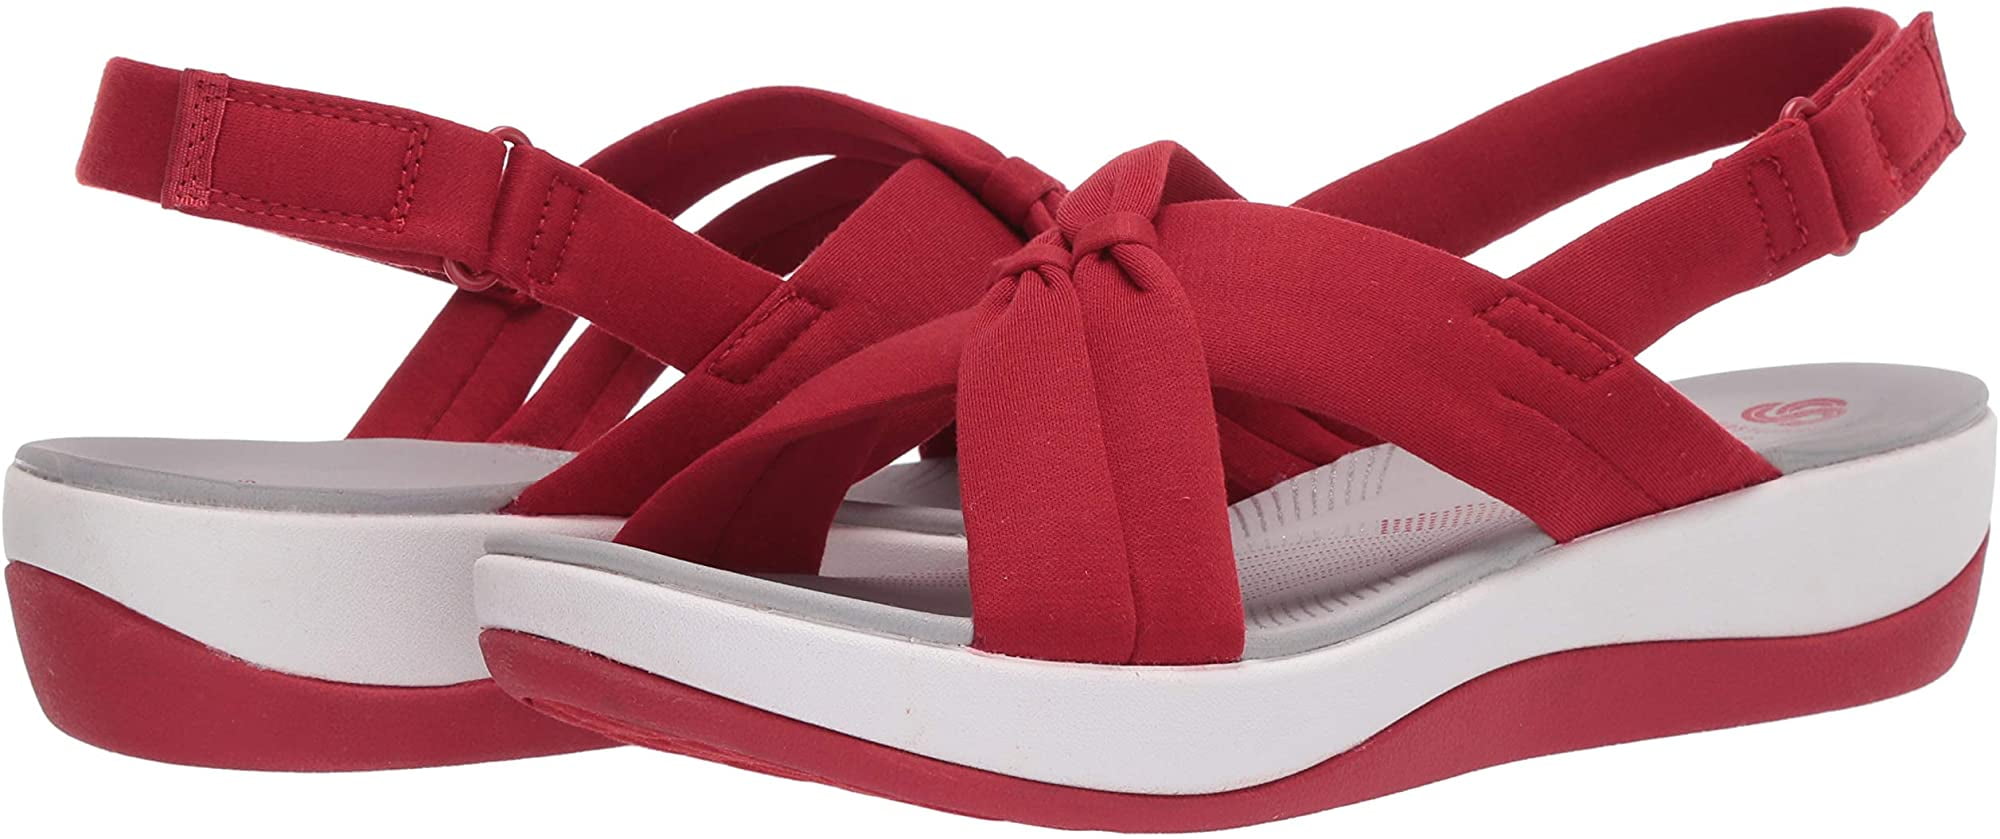 clarks womens red sandals